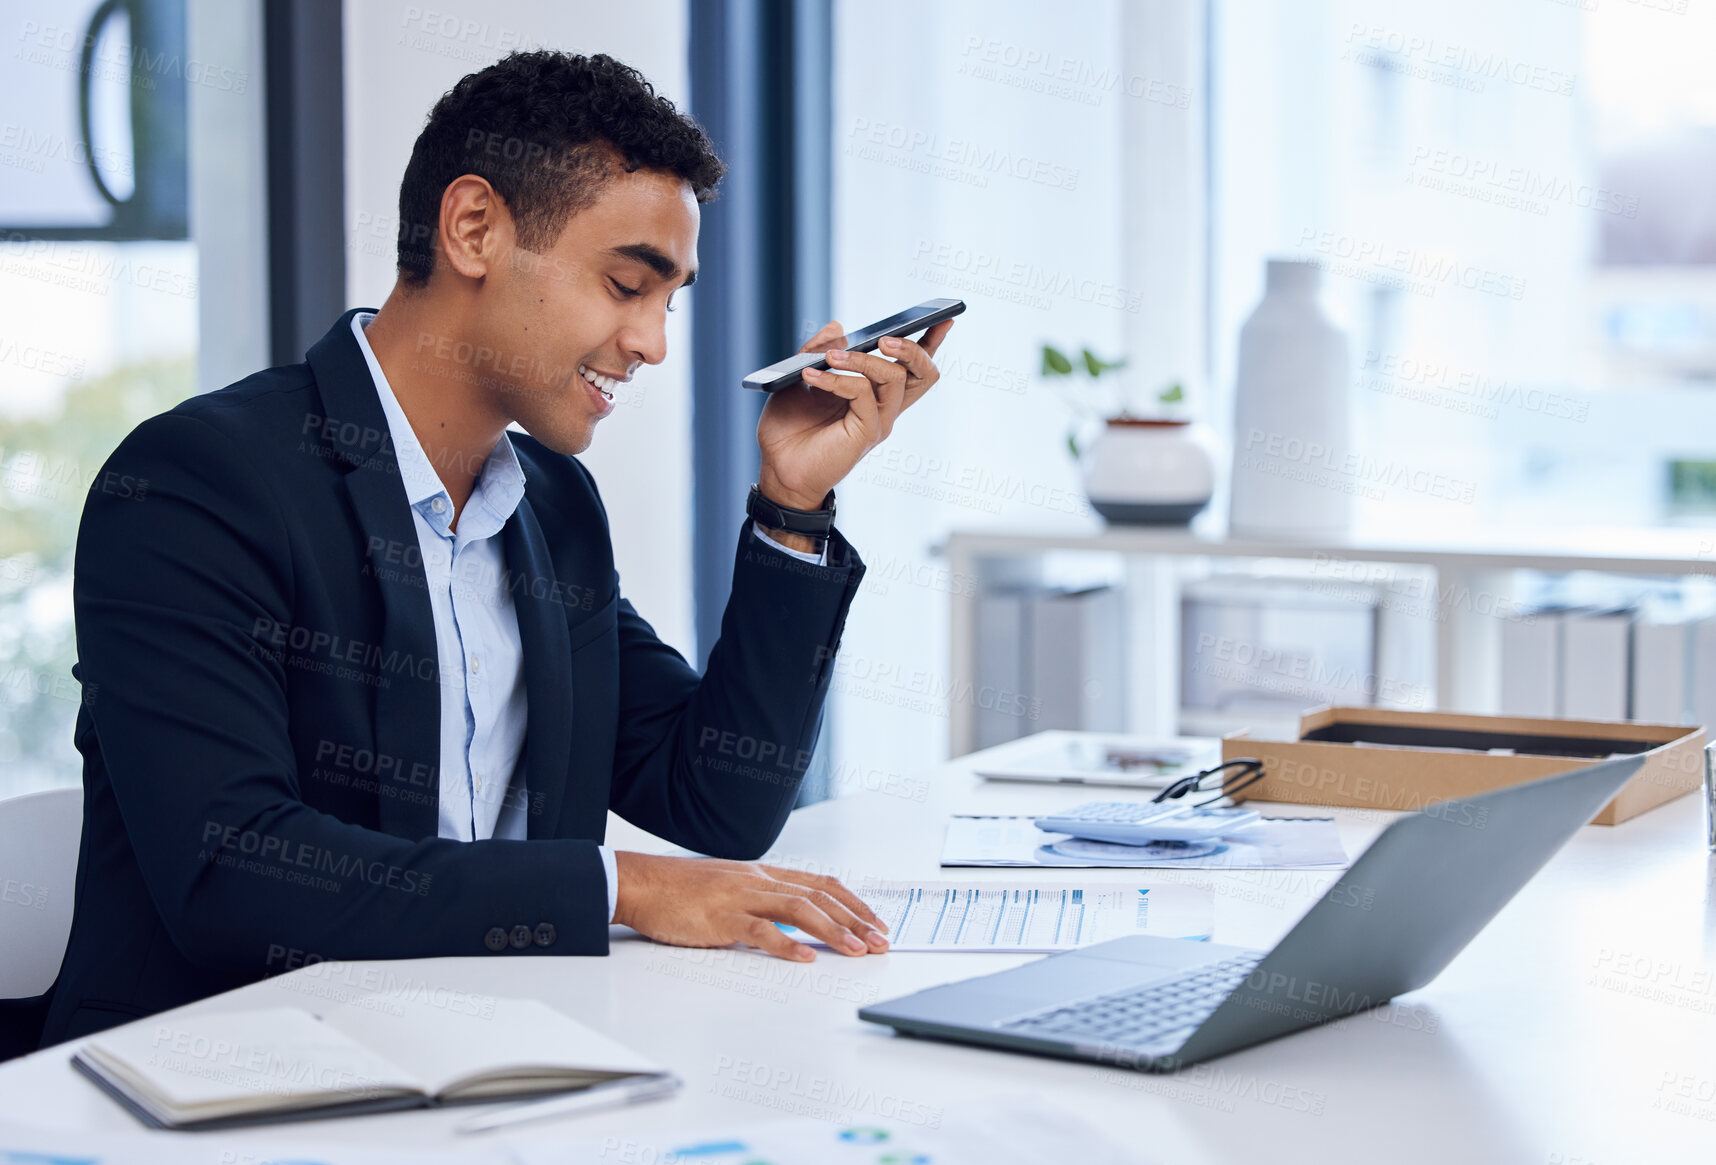 Buy stock photo Shot of a young businessman using a cellphone while going through paperwork in an office